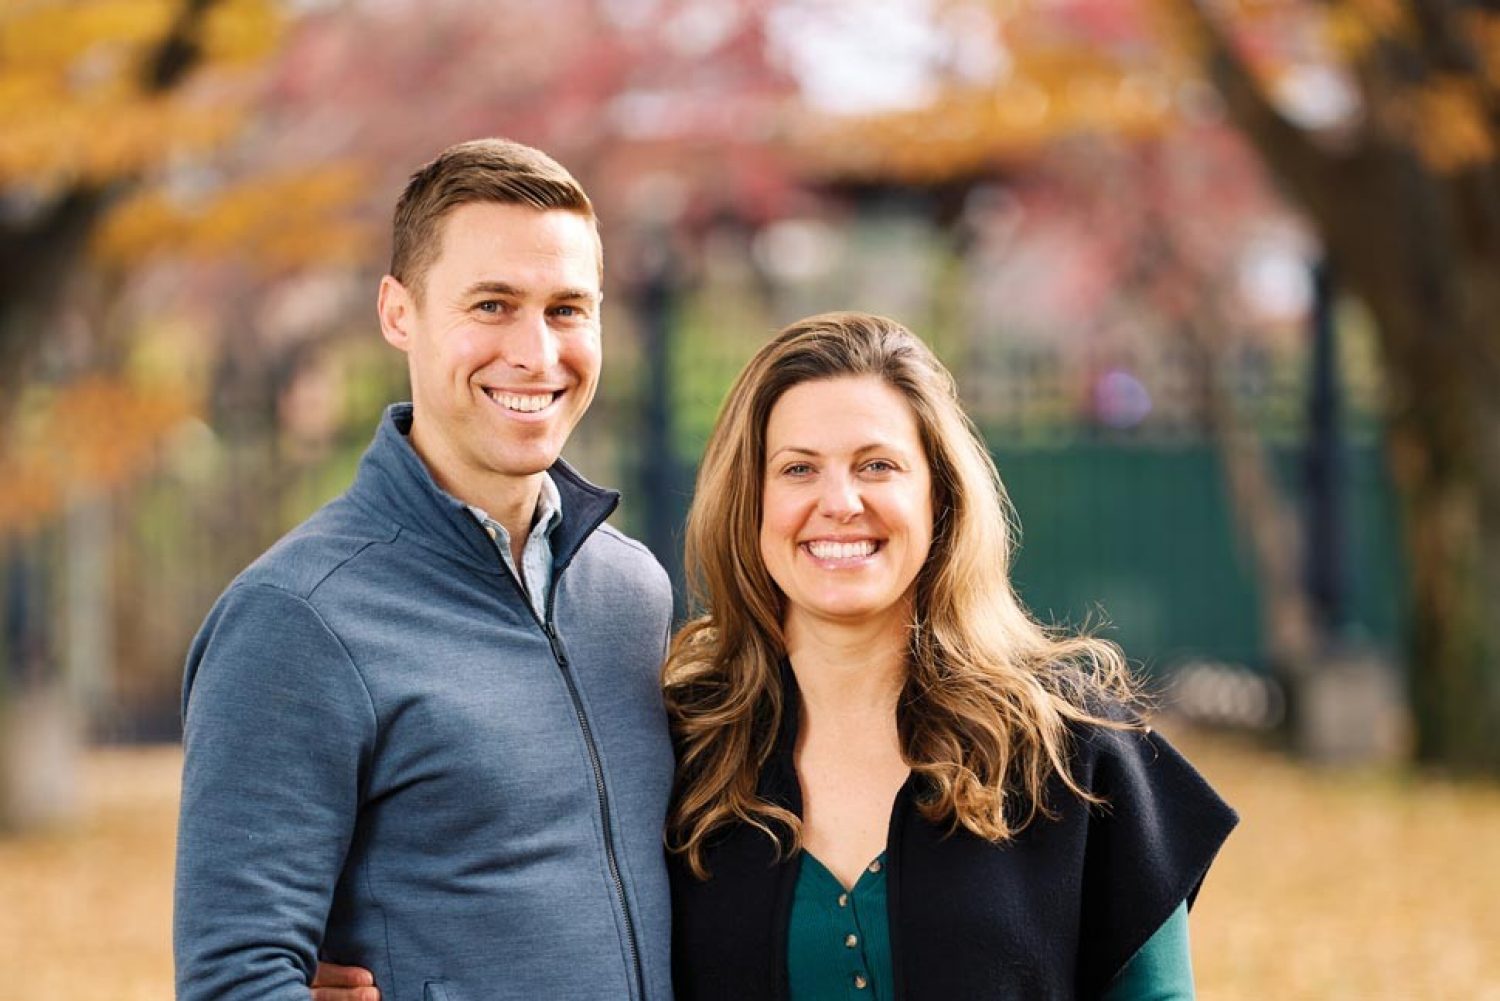 Patrick Downes ’05 and Jessica Kensky photographed in Cambridge, MA